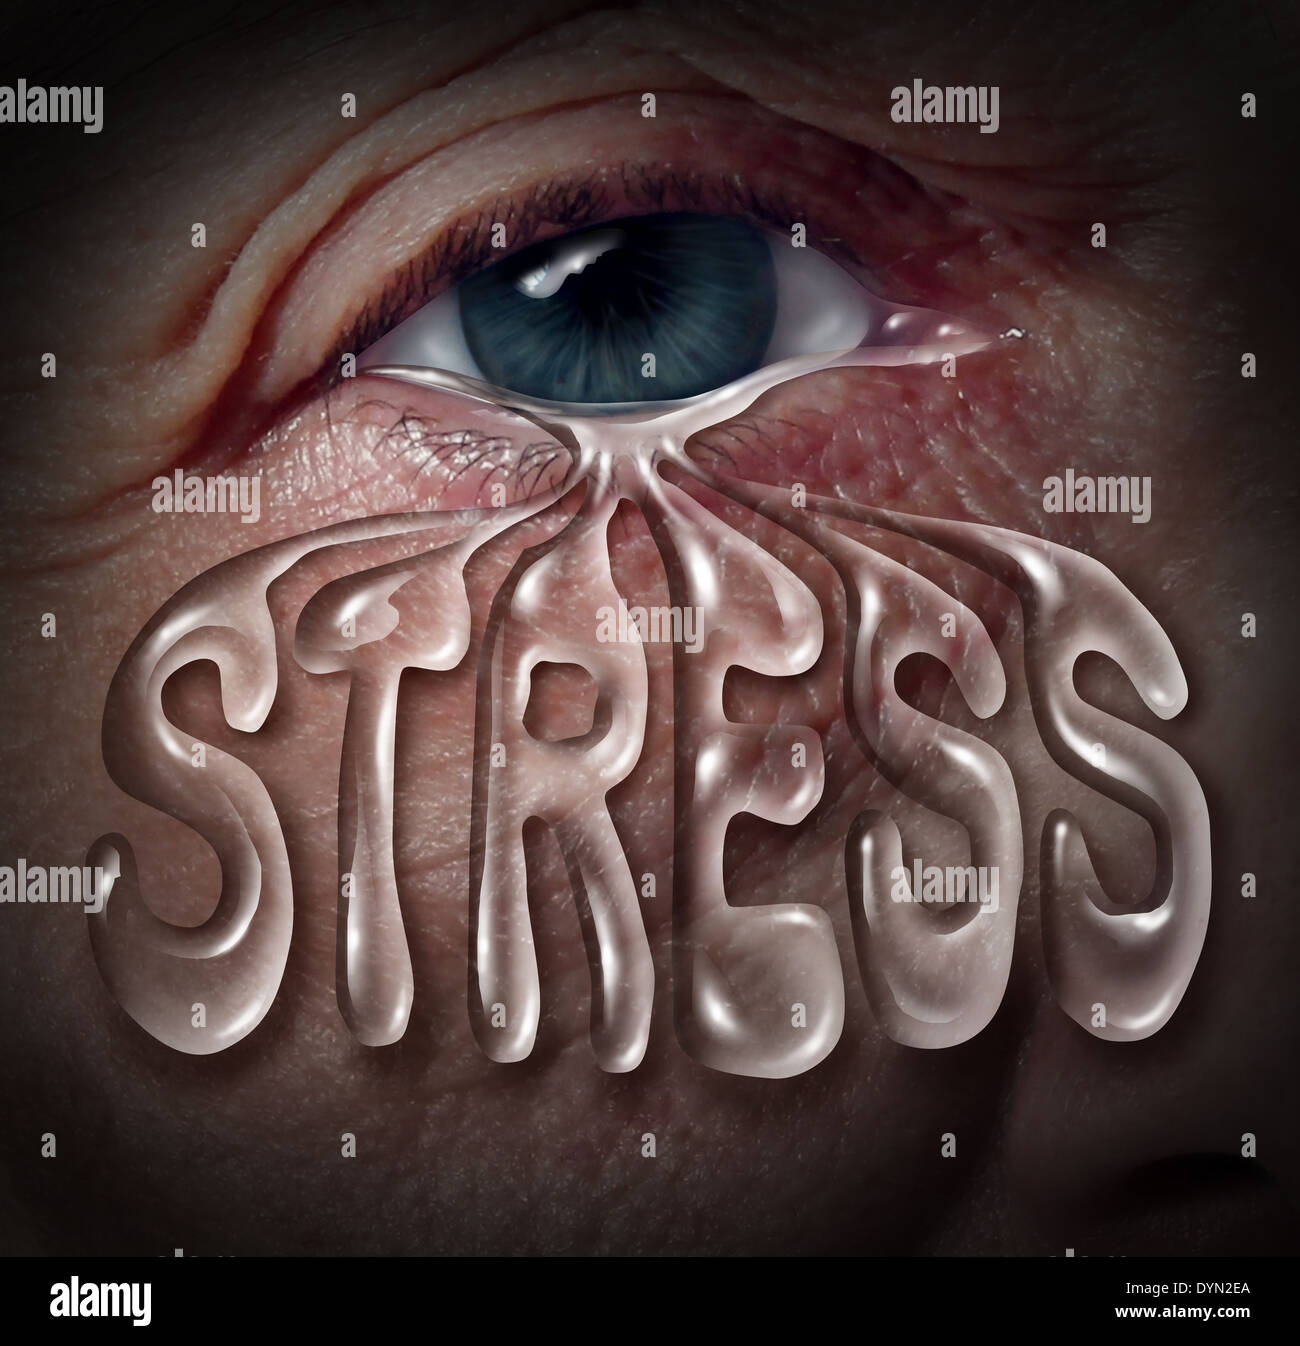 Human stress concept as an eye crying a tear drop that is shaped with letters as a metaphor for mental health problems related Stock Photo